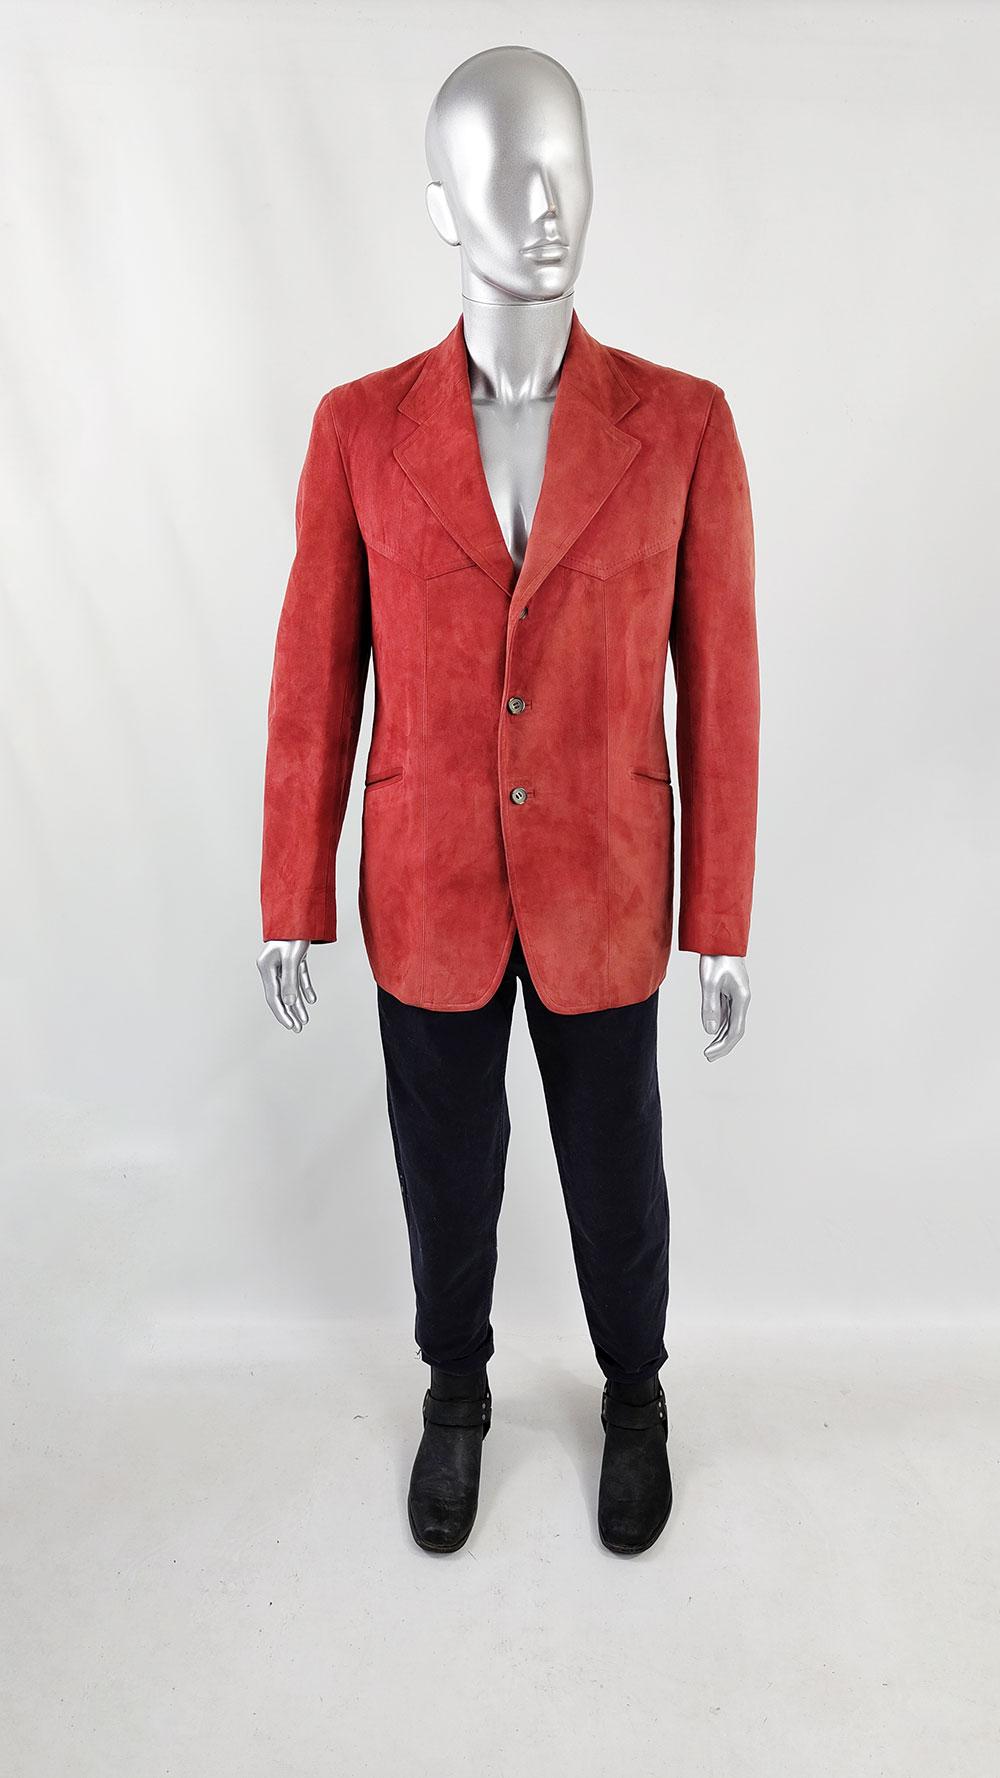 An incredible vintage men's jacket from the early 70s by Australian label Gwynn Jones. Crafted in red British lambskin suede, it features single-breasted buttons, notch lapels, and a pointed yoke.

Size: Marked vintage 42r but may have been sized